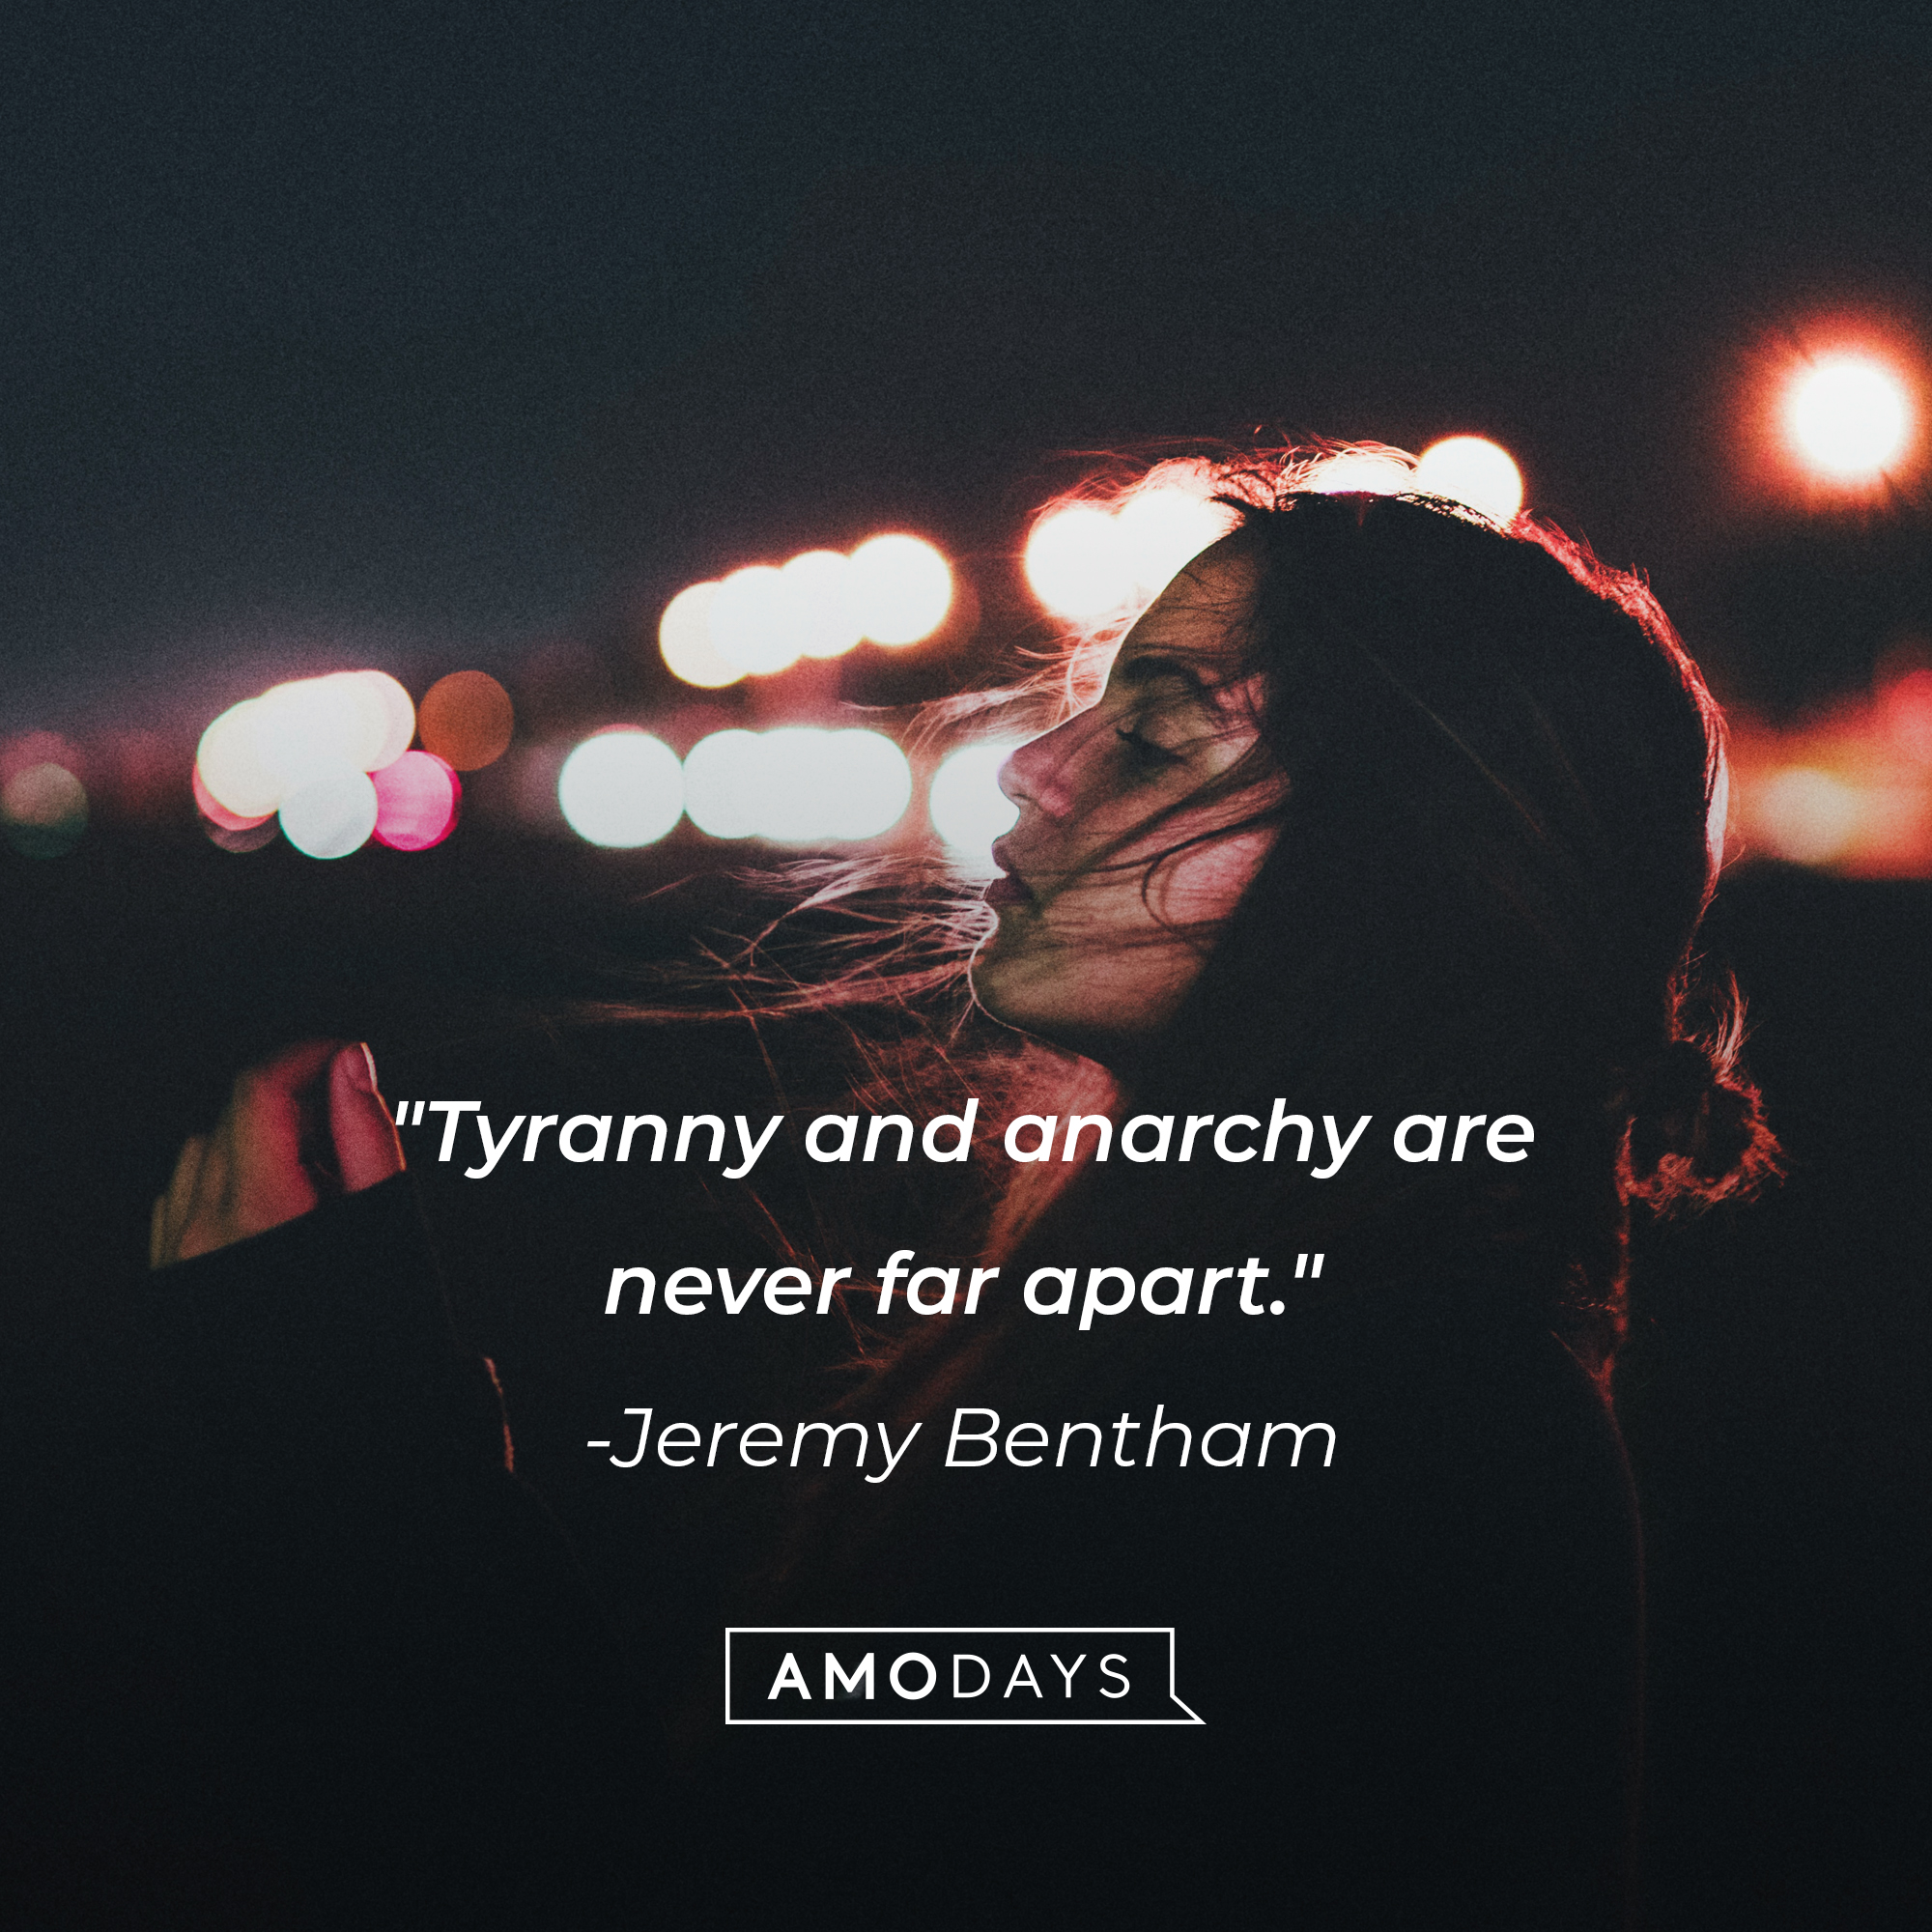 Jeremy Bentham's quote: "Tyranny and anarchy are never far apart." | Image: AmoDays